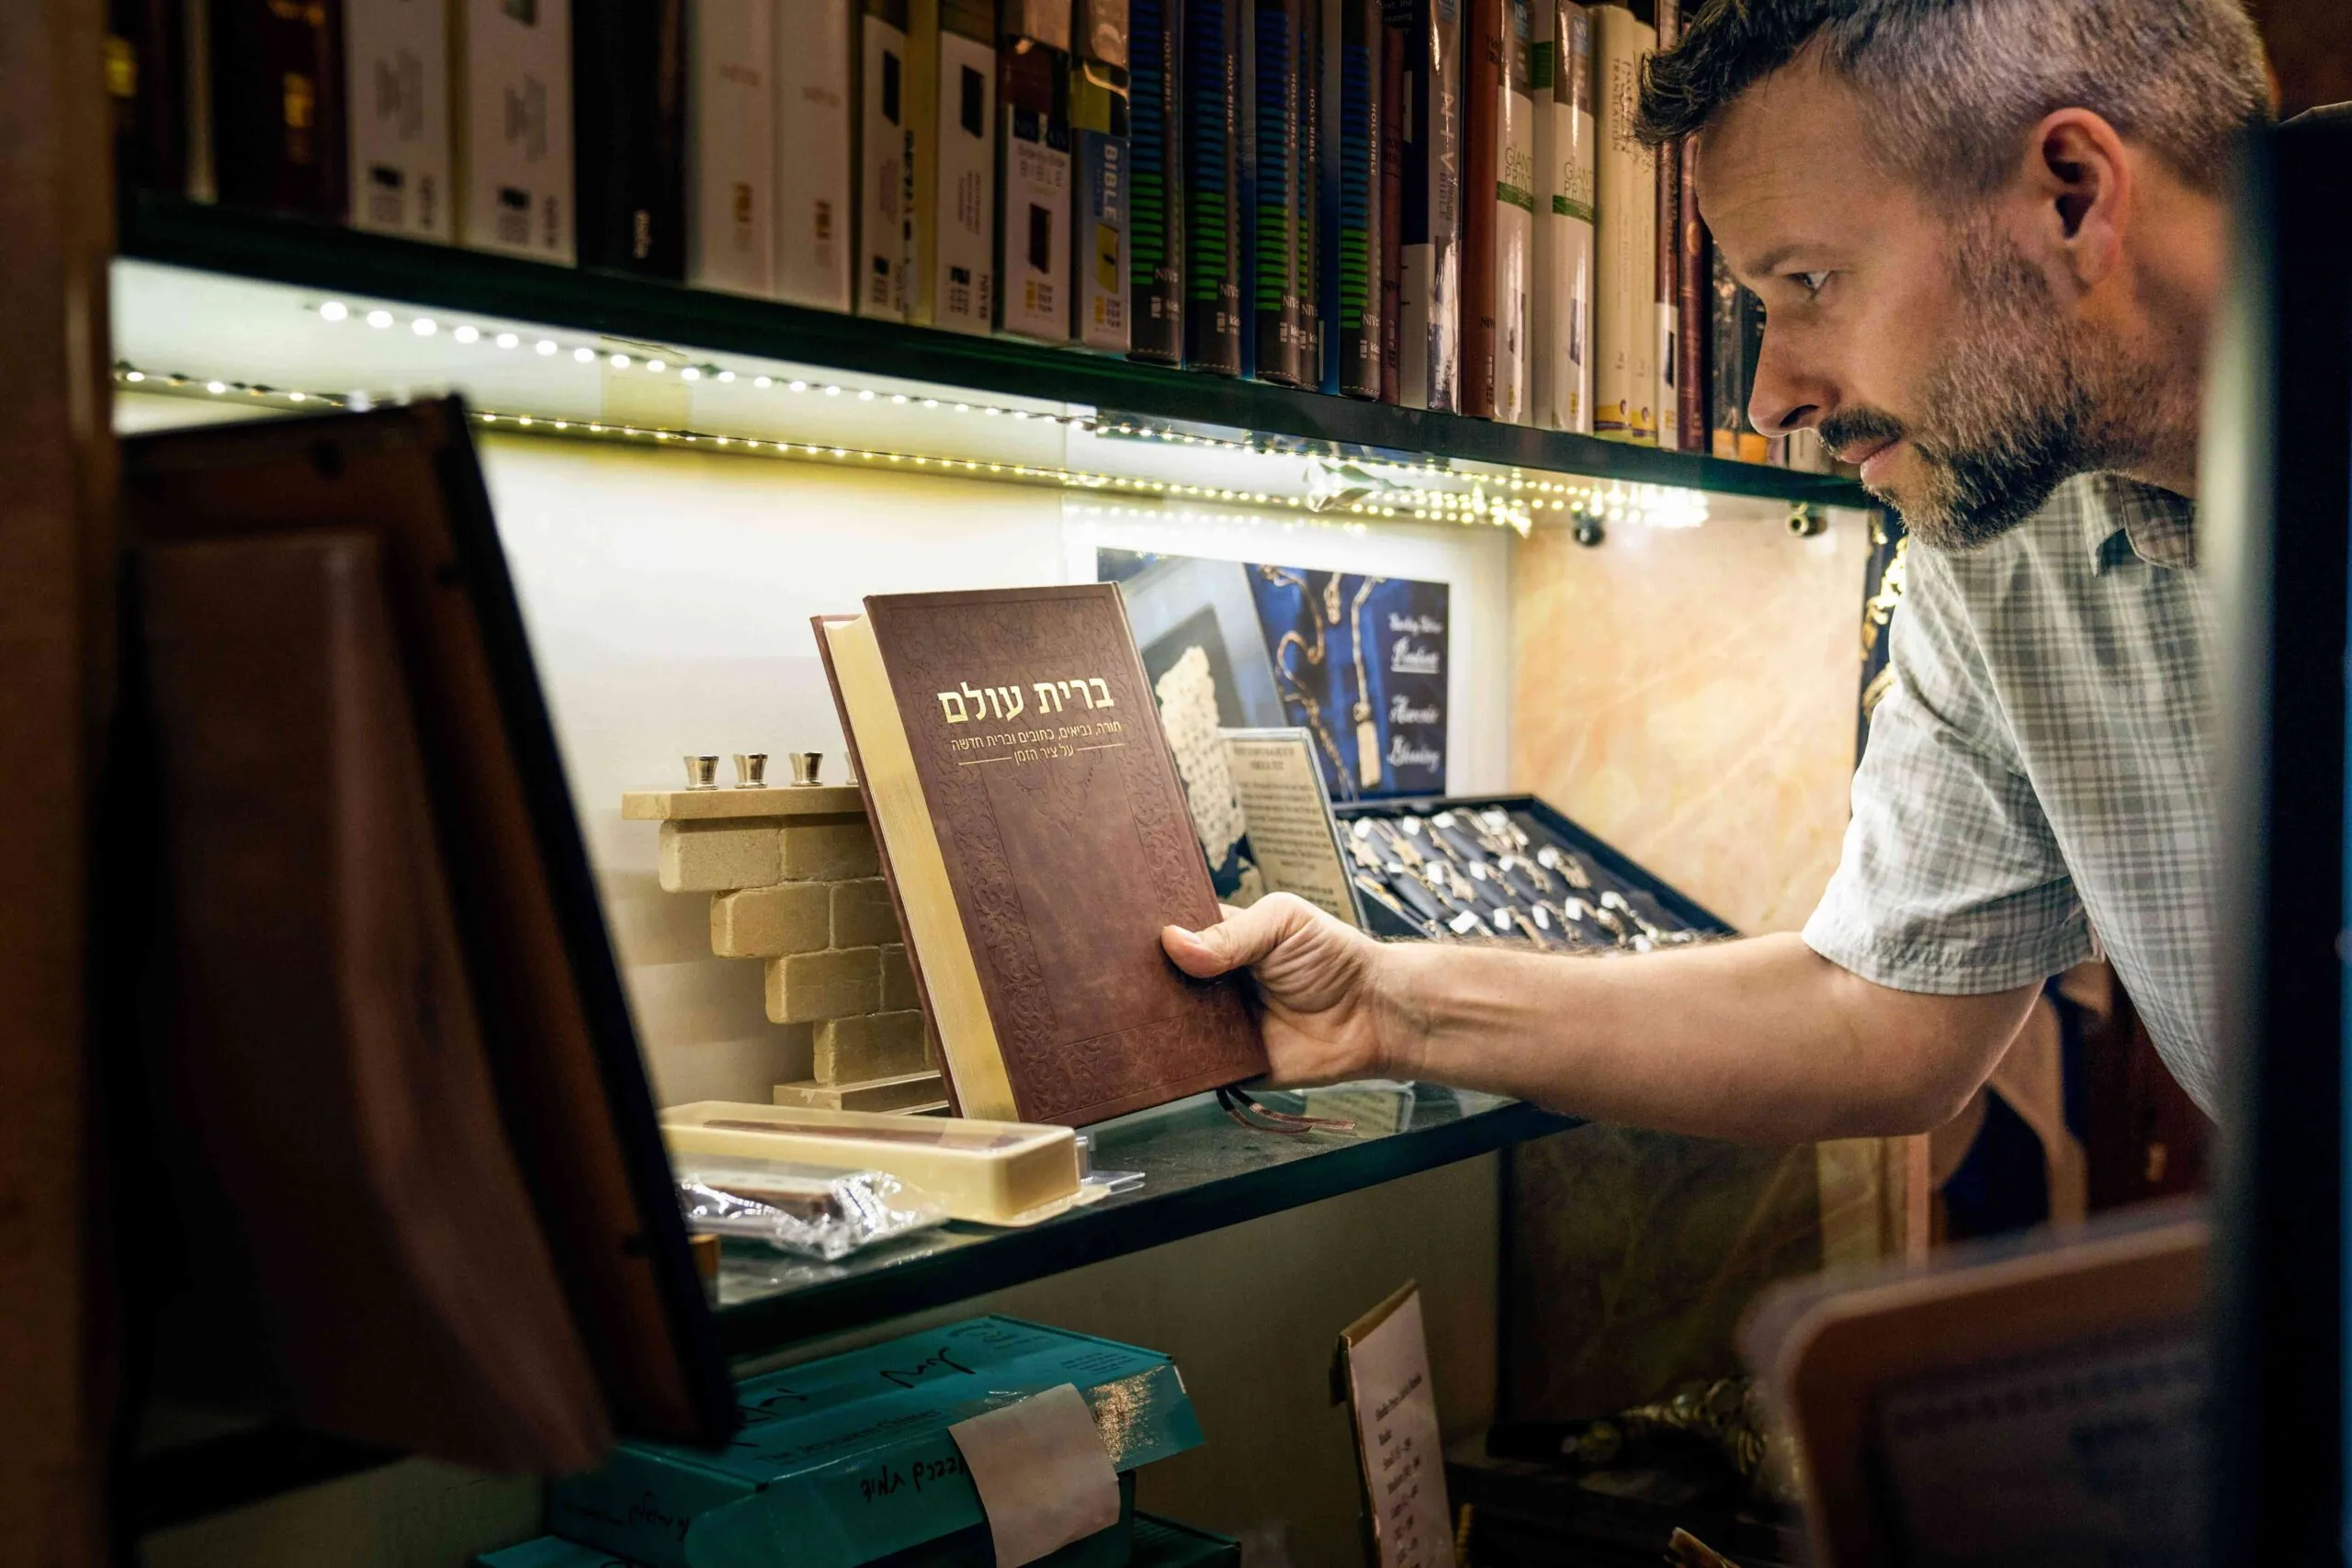 "Brit Olam” (the Hebrew version of The Narrated Bible) on display at the Israel Bible Society shop in Jerusalem